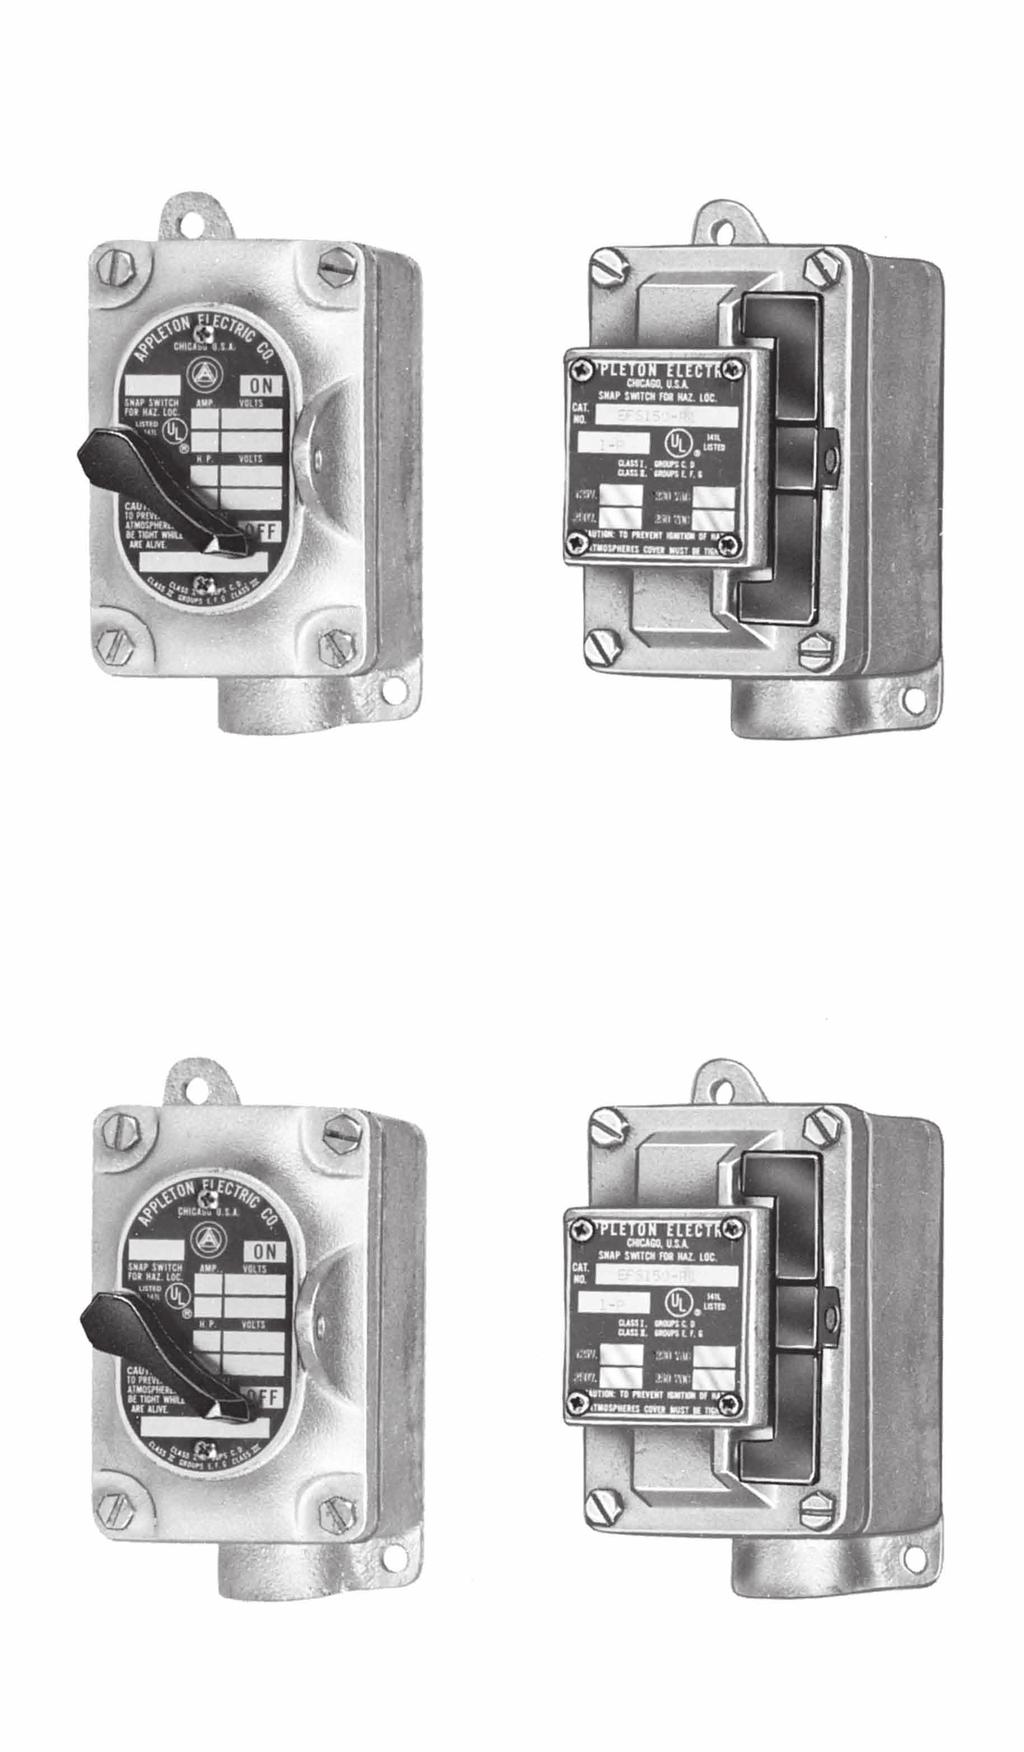 -2 EDS Factory Sealed and EFS Tumbler Switches: Applications Designed to prevent arcing of enclosed switches in ignitable atmospheres during connect and disconnect operation of lighting and light